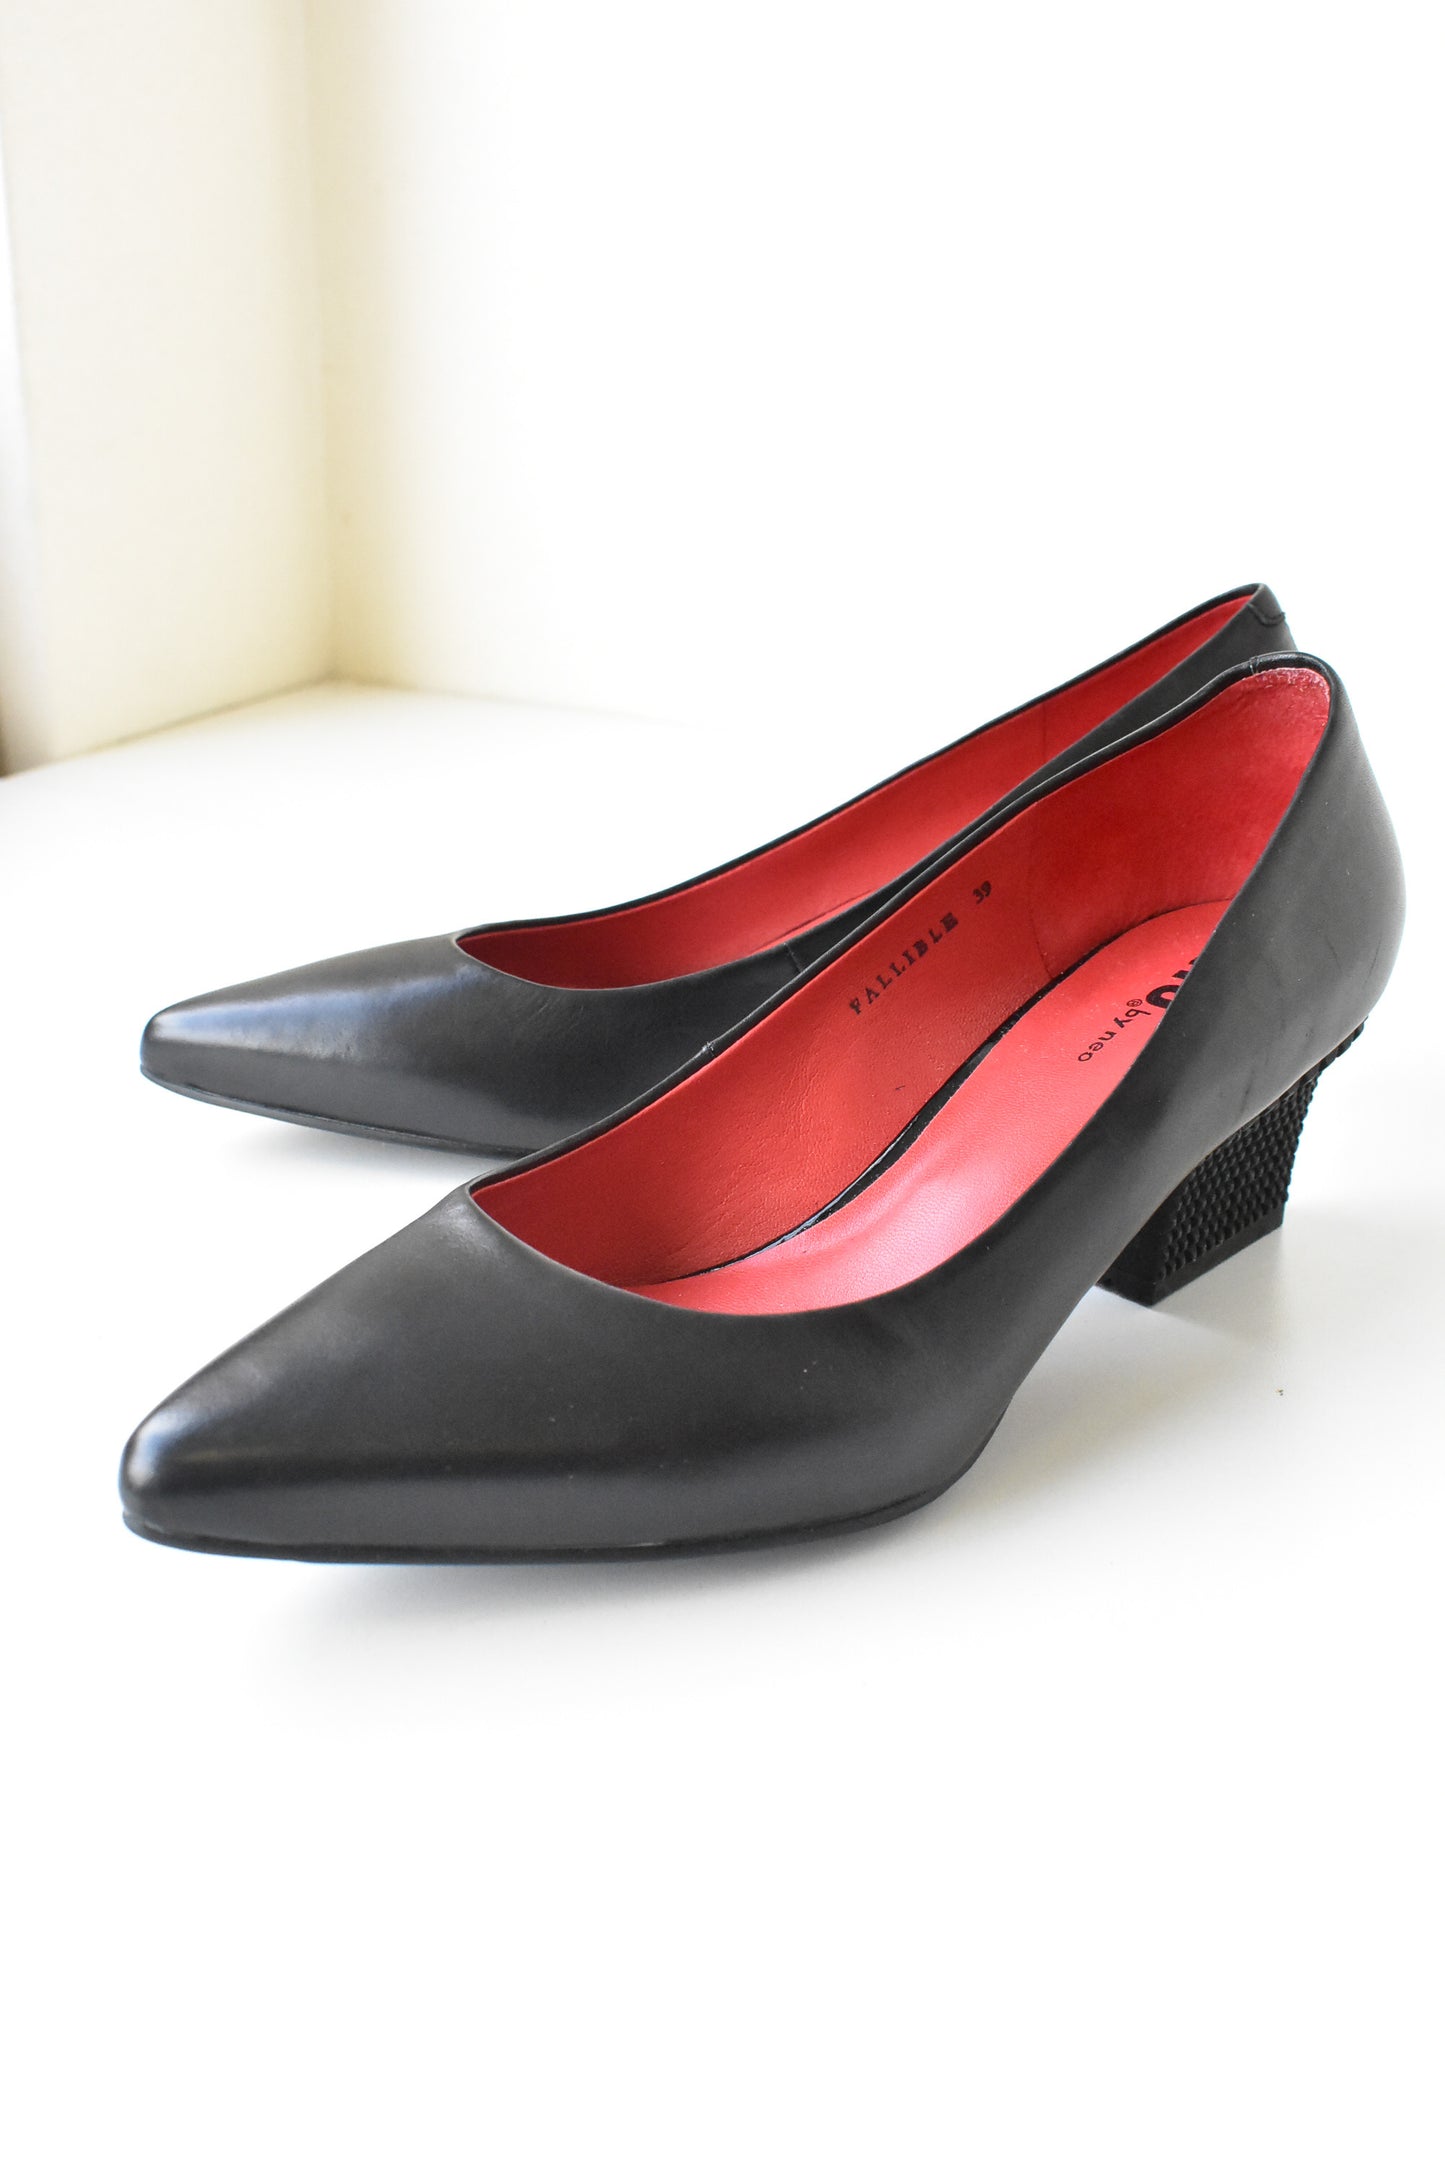 Nu By Neo black leather heels, size 39